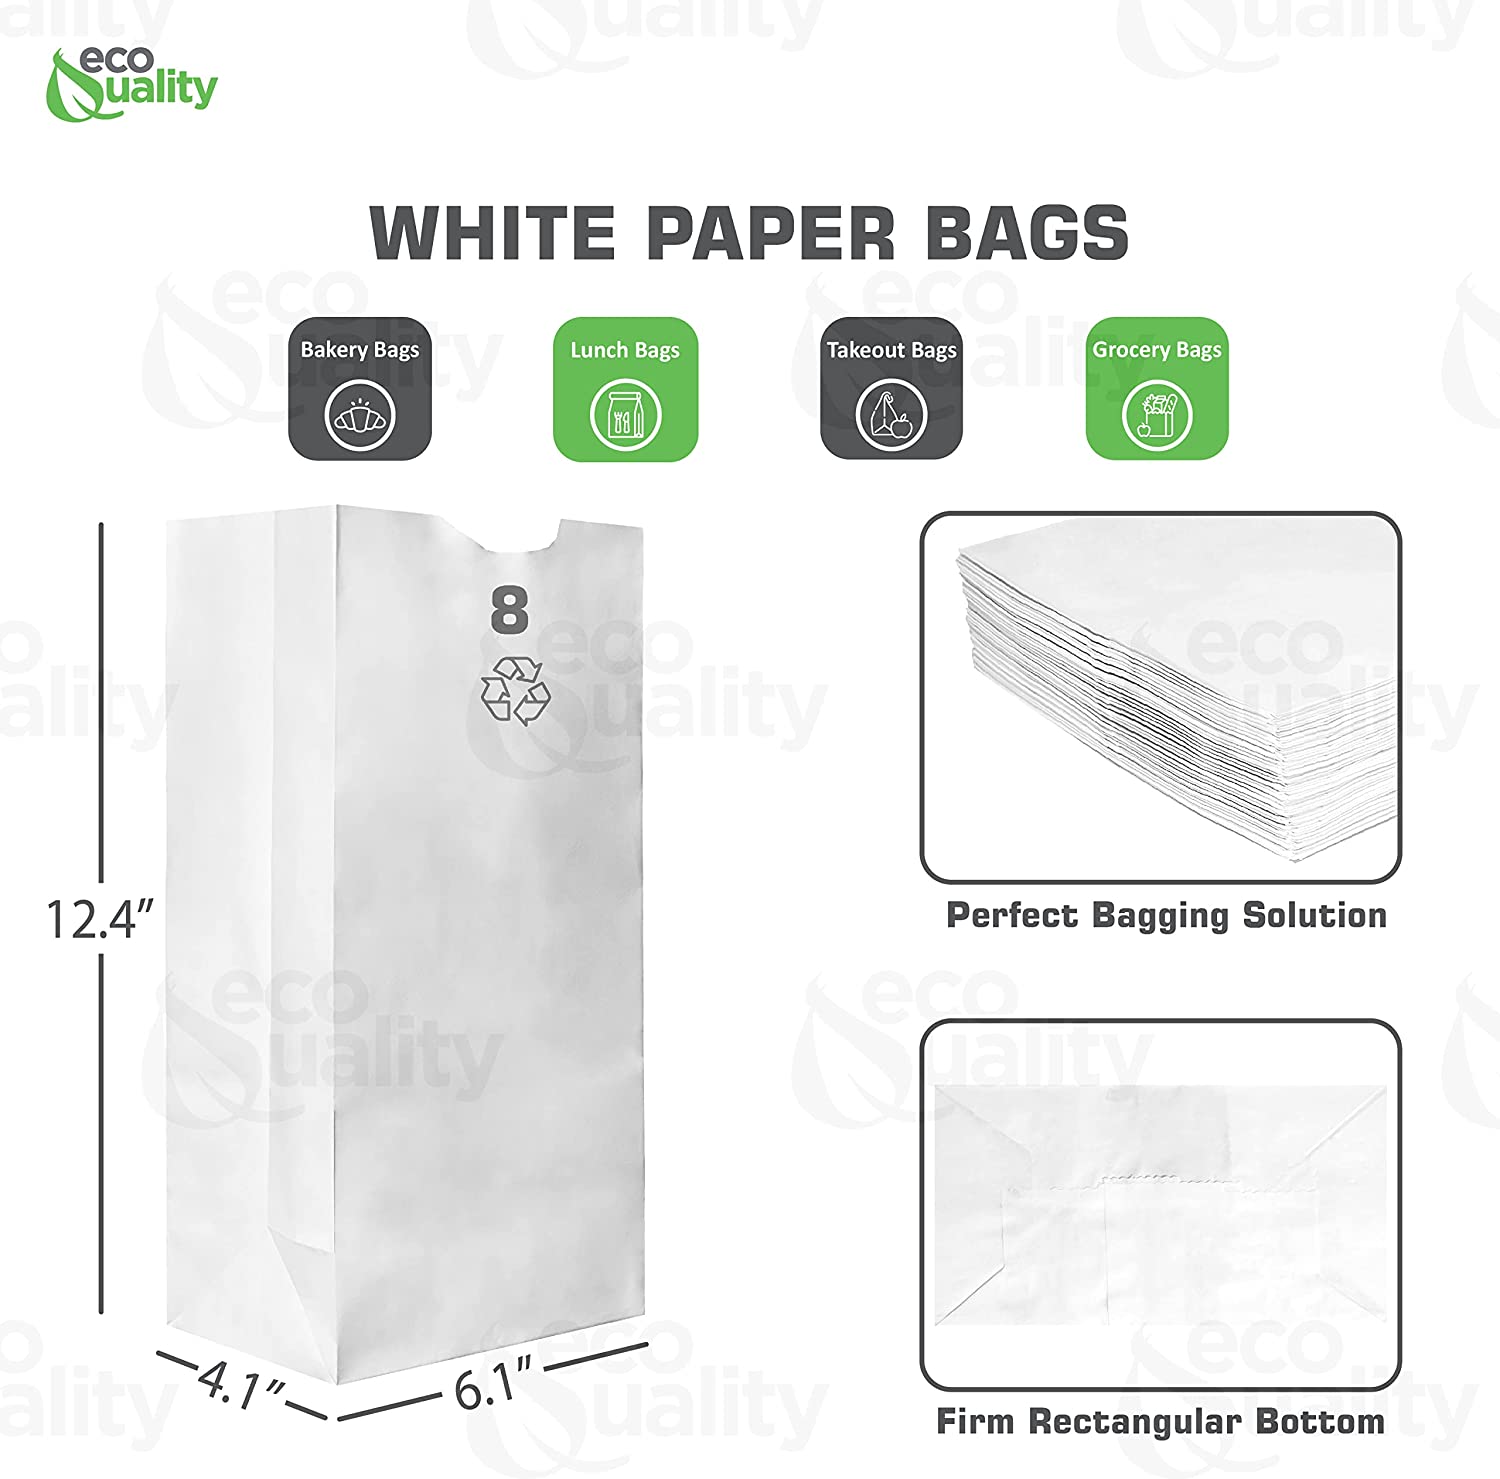 disposable bag White Paper Bags white Paper Shopping Bags foldable paper bag catering bags white kraft paper bag 1 pound candy bag snack bag gift bags DIY Bags arts and craft Sandwich Bag white paper bag party favor bag lunch bag togo bag takeout bag Restaurant supplies paper bakery bags Kraft Paper Bags kraft grocery bags supermarket Household Supplies hero bread tall long paper bag 8 pound